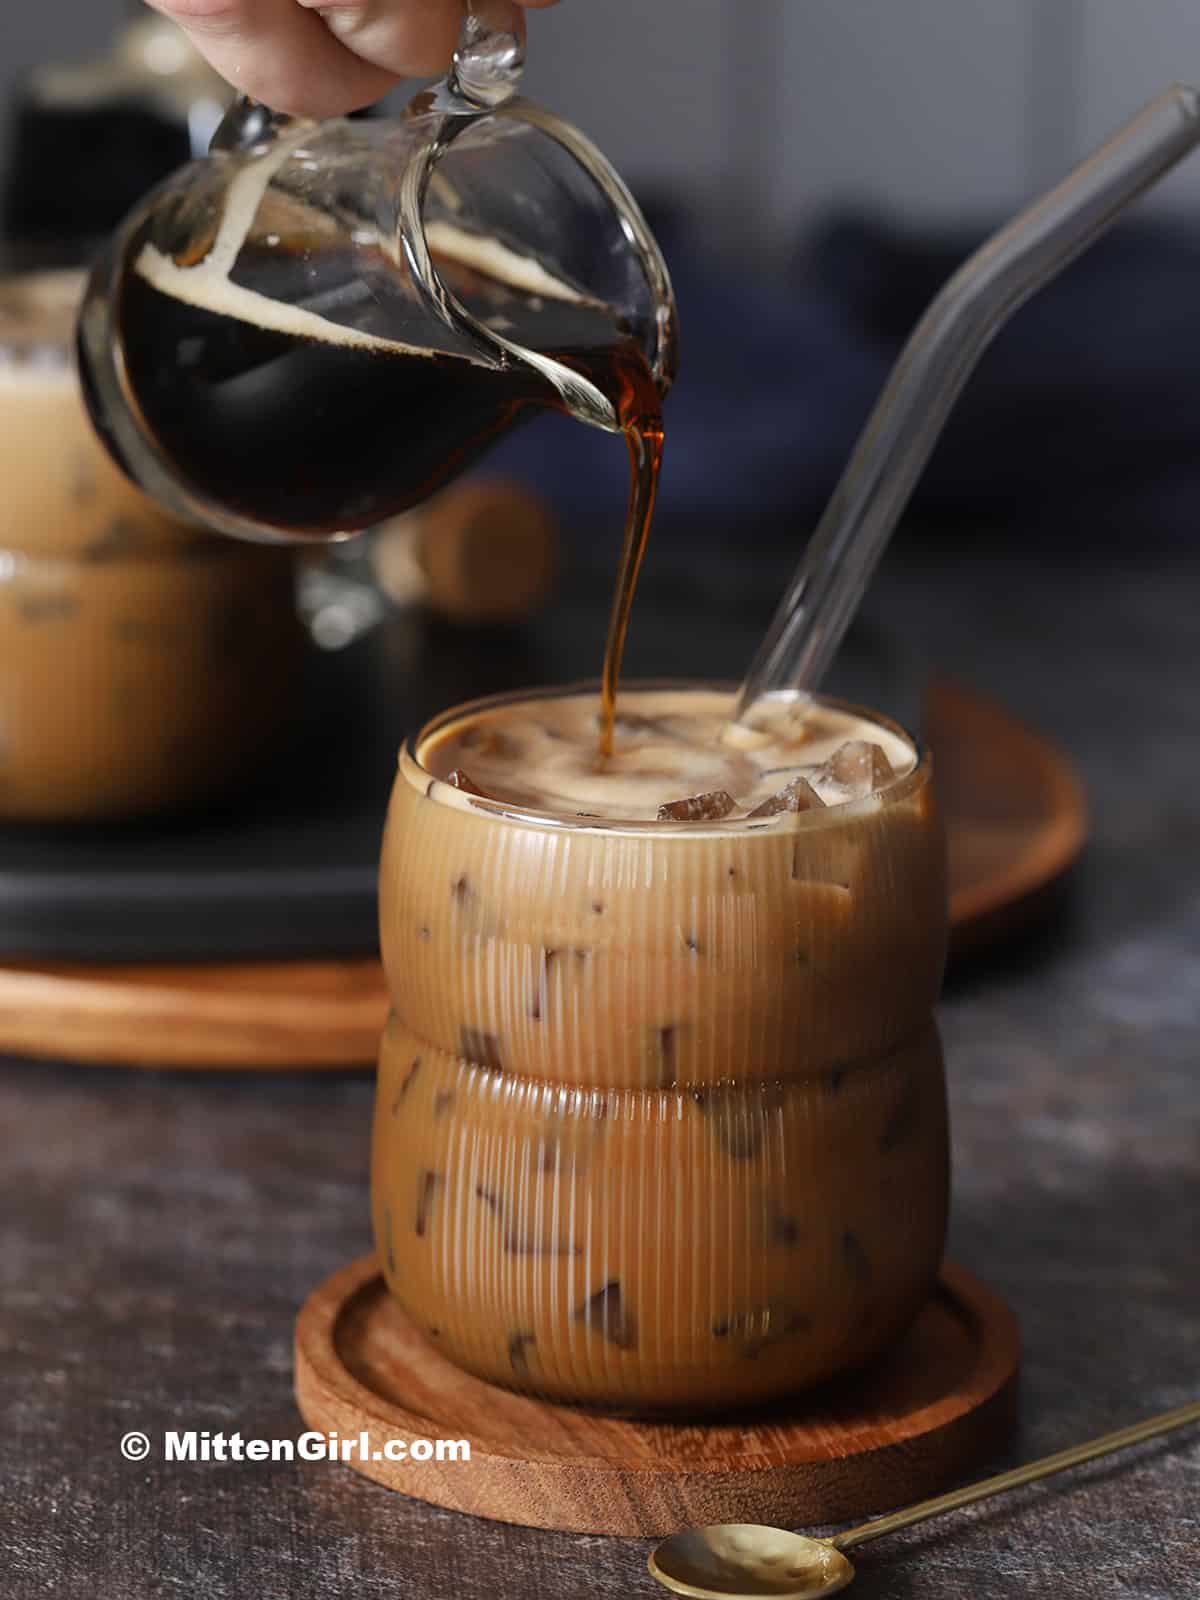 Coffee syrup being poured into a glass of iced coffee.